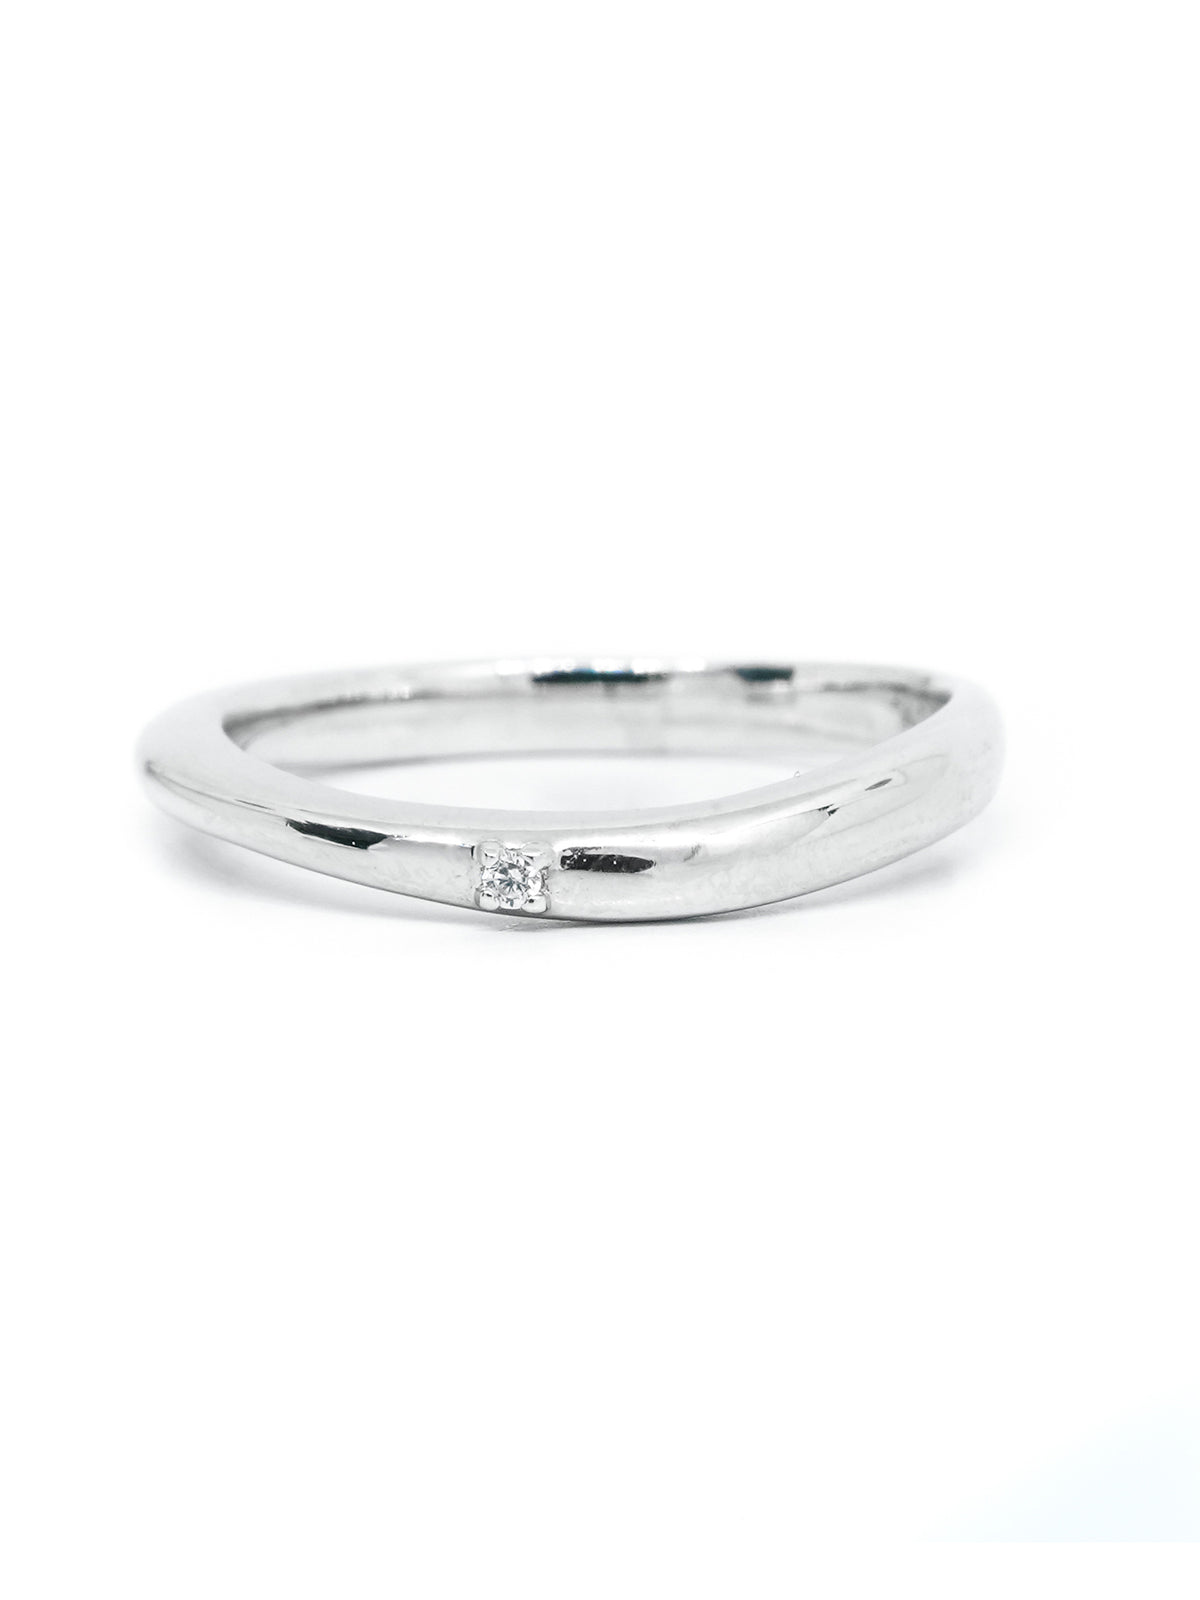 PLAIN SILVER SOLITAIRE BAND RING-1